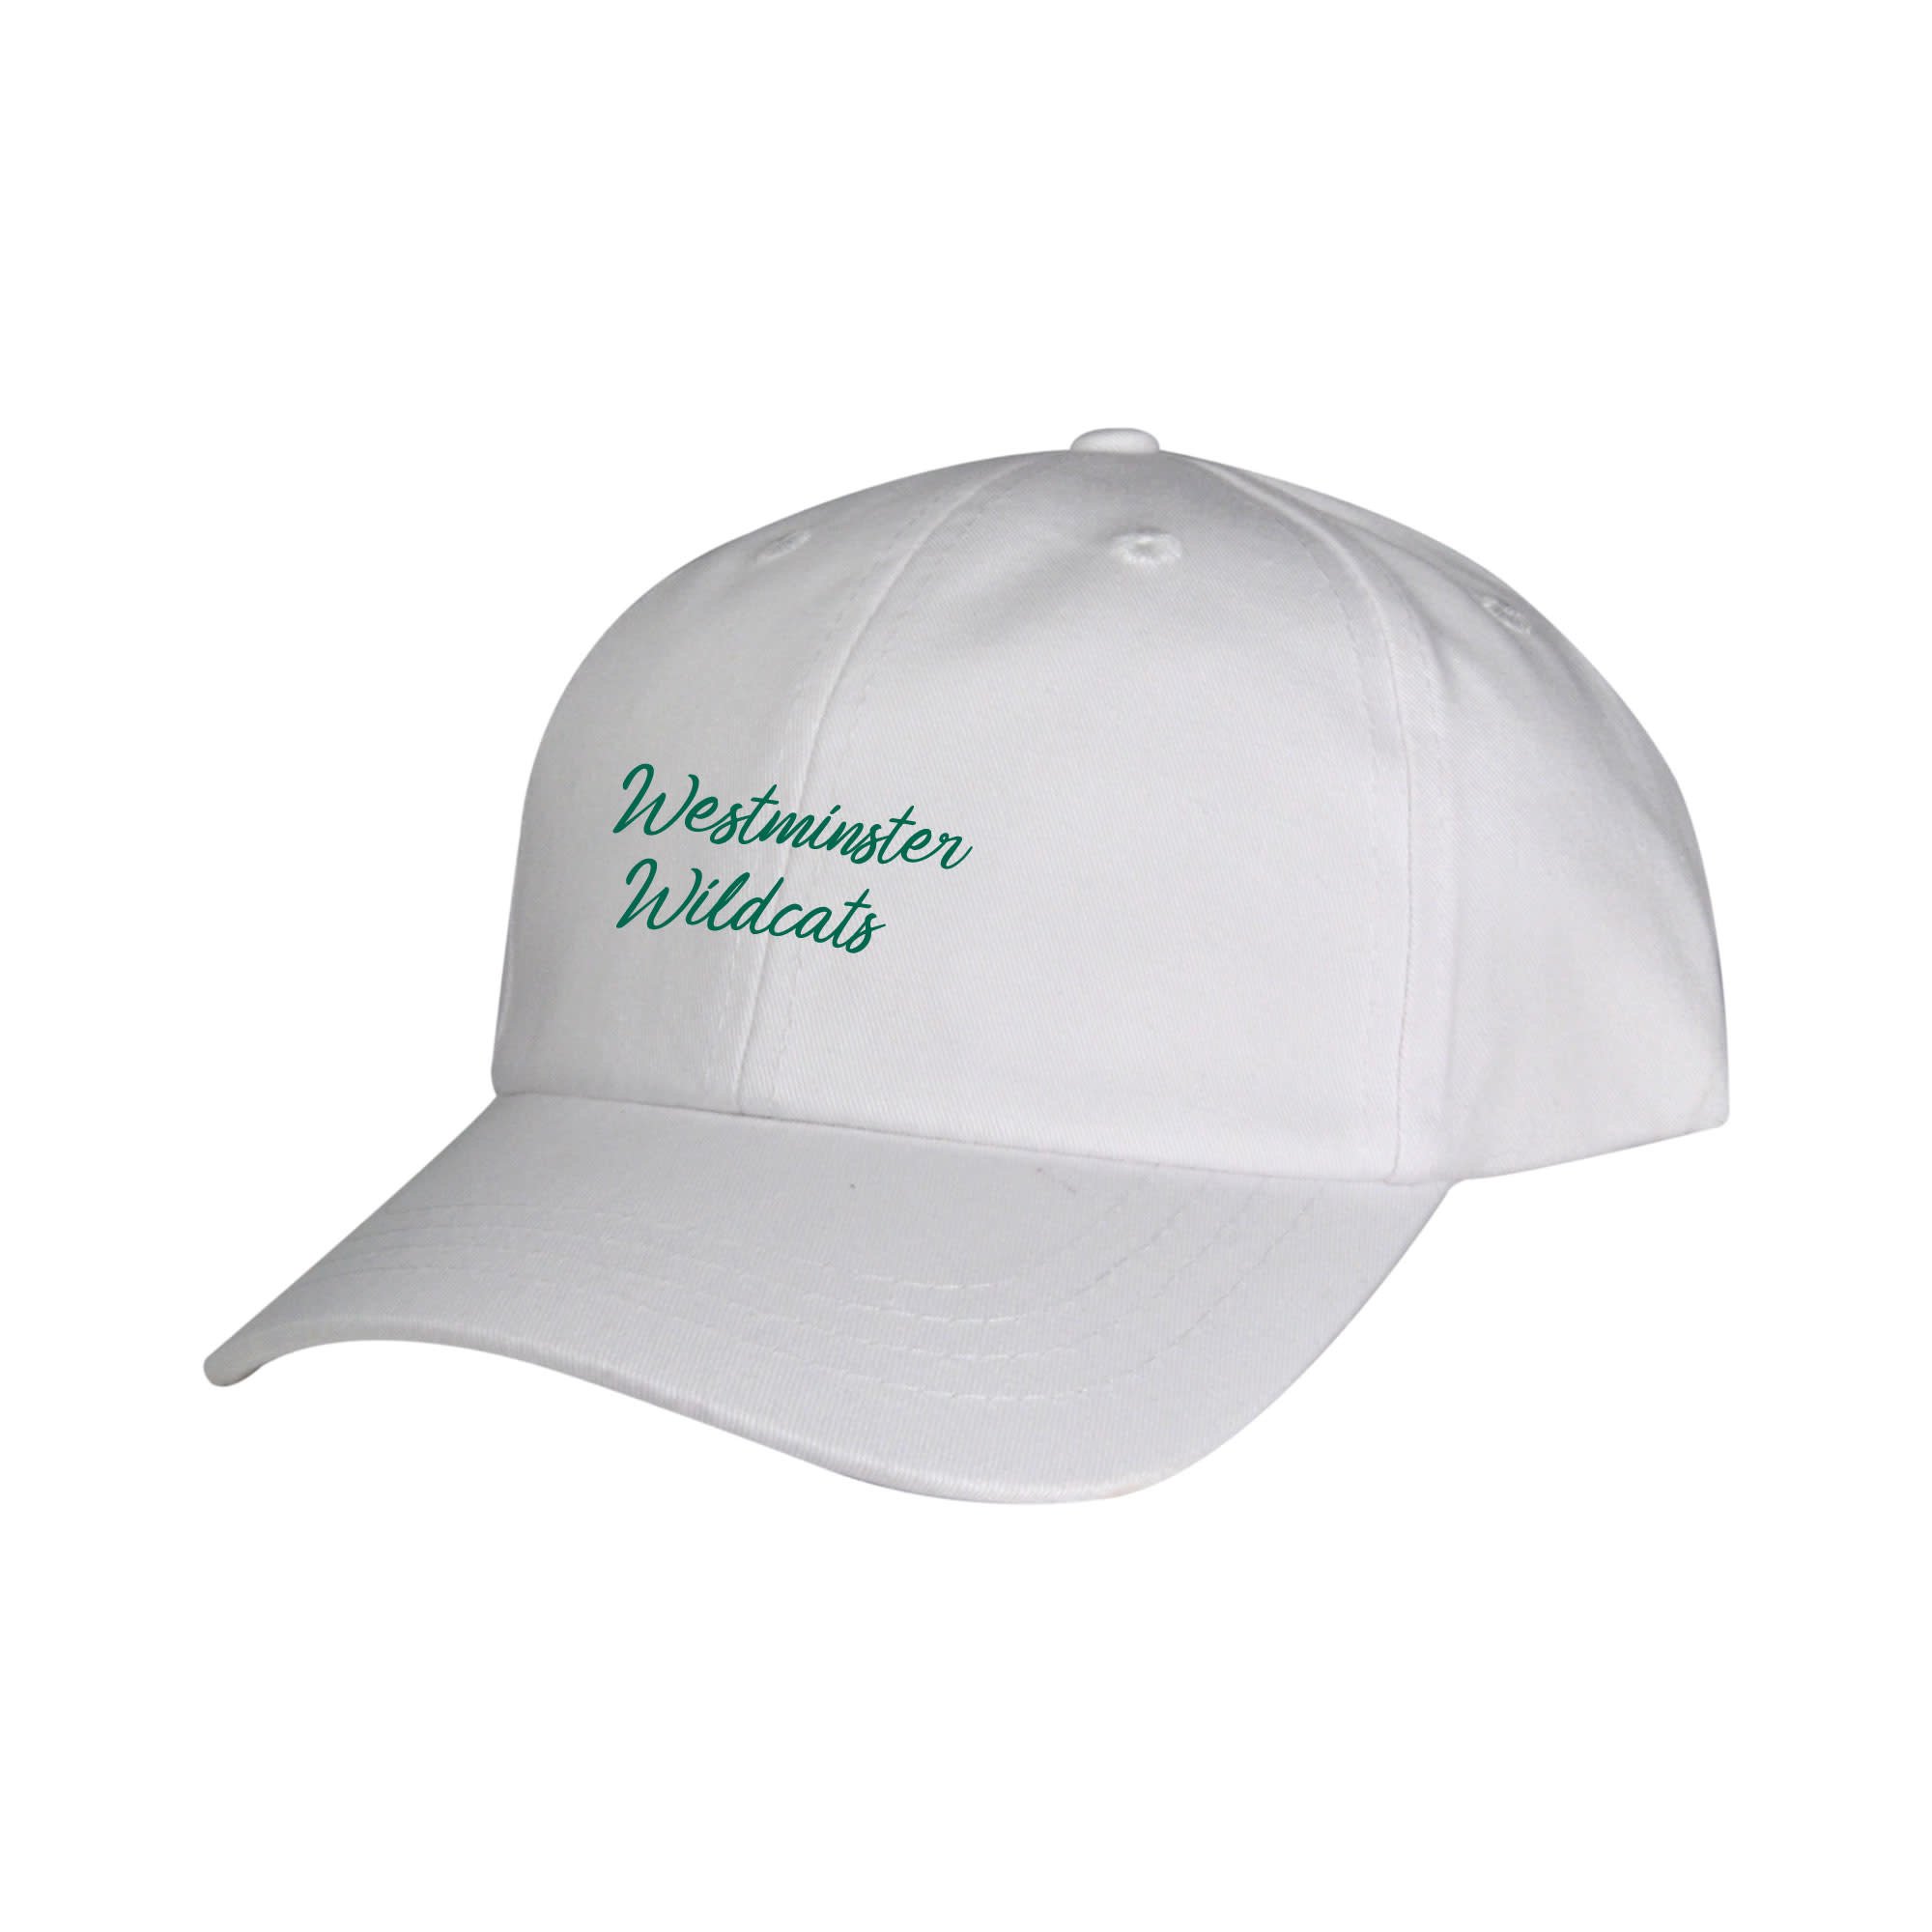 Garb Hat: Bennett Washed Twill, "Westminster Wildcats" Youth